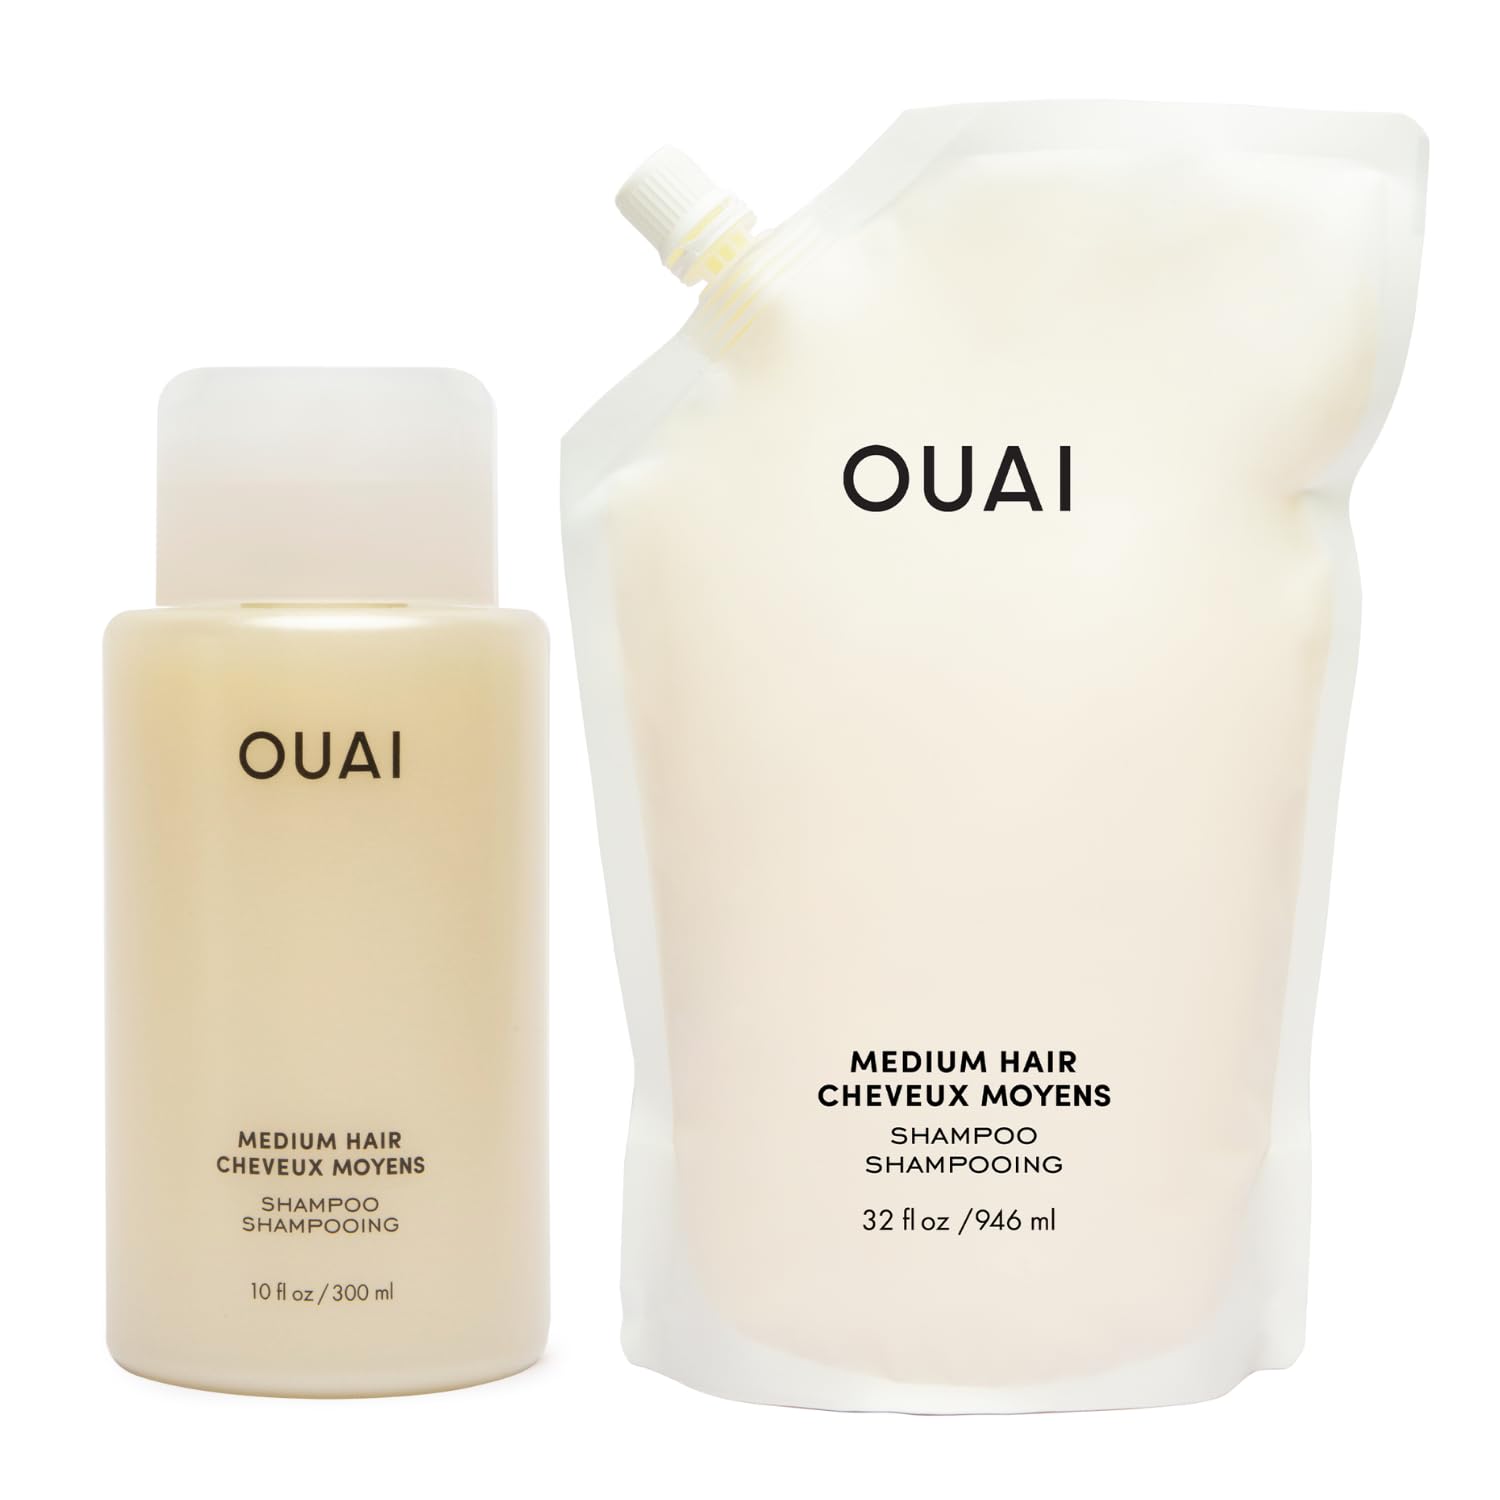 OUAI Medium Shampoo + Refill - Hydrating Shampoo with Coconut Oil, Babassu, Kumquat Extract and Keratin - Strengthens, Nourishes and Adds Shine - Sulfate Free Hair Care Products (2 Count, 10 Oz/32 Oz)